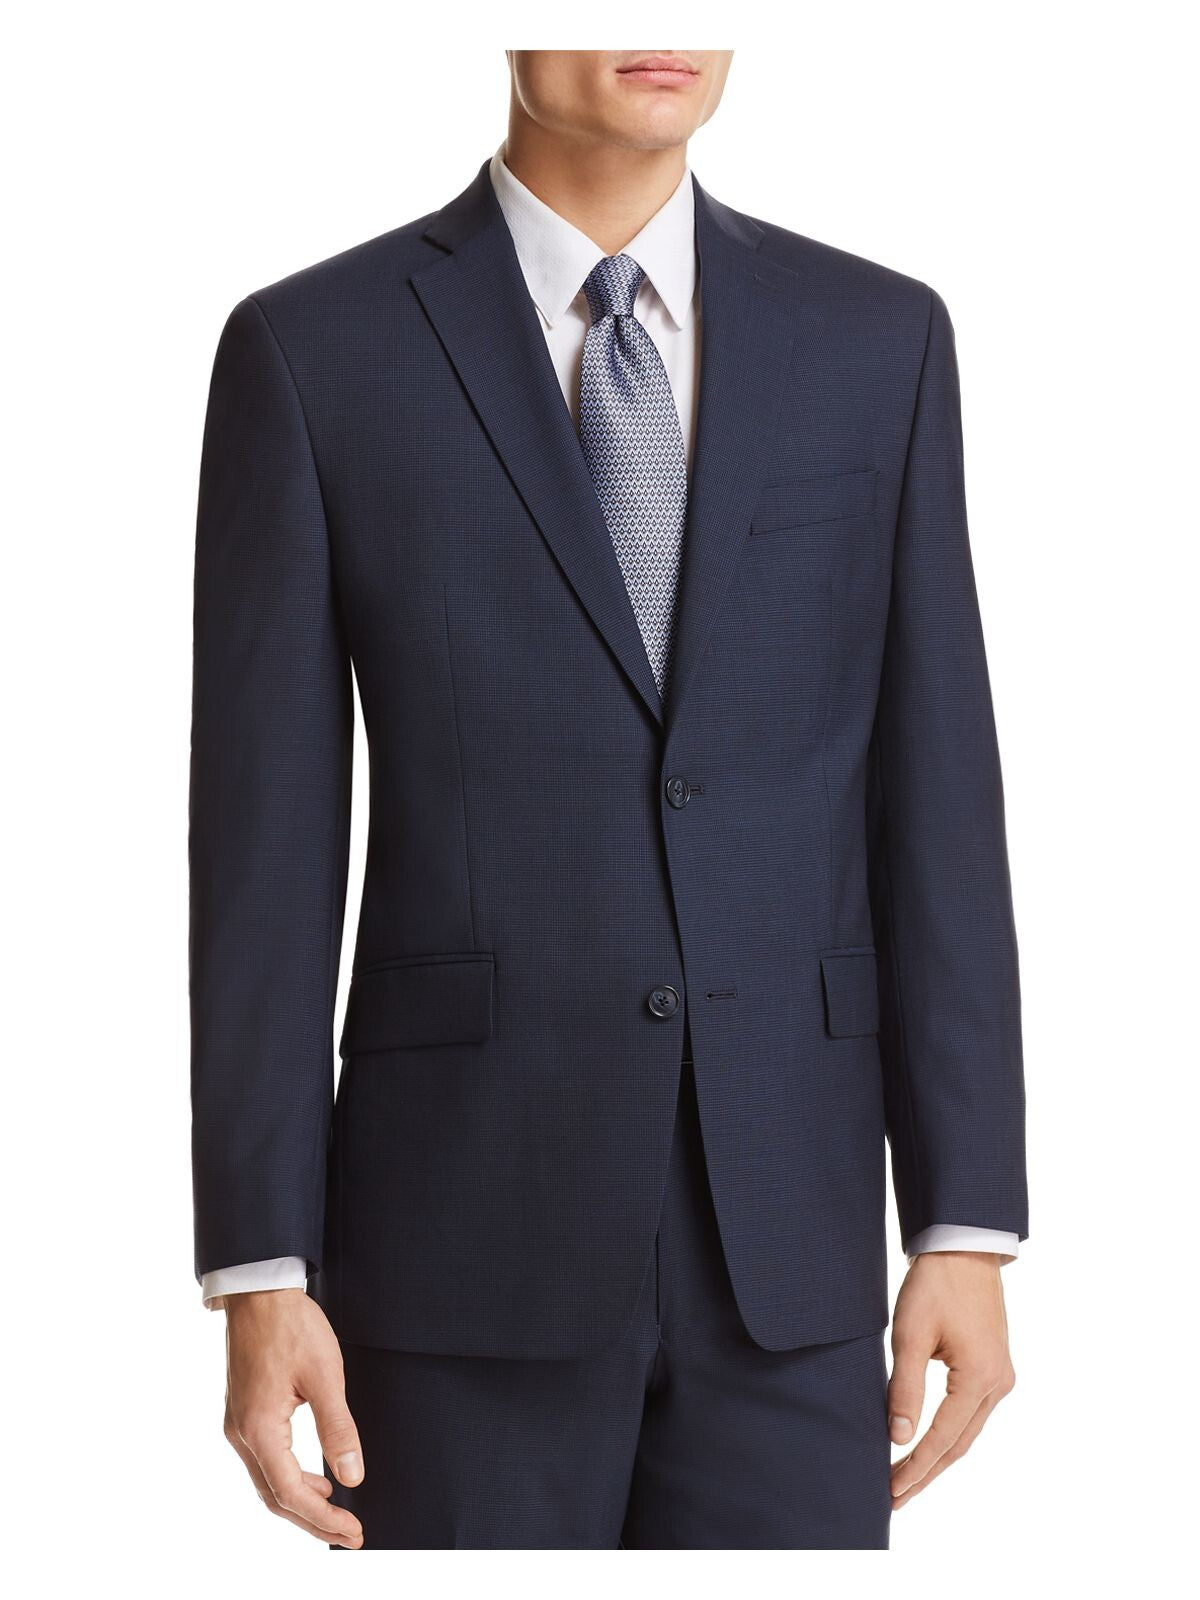 MICHAEL KORS Mens Navy Single Breasted, Stretch, Classic Fit Wool Blend Suit Separate Blazer Jacket 46R